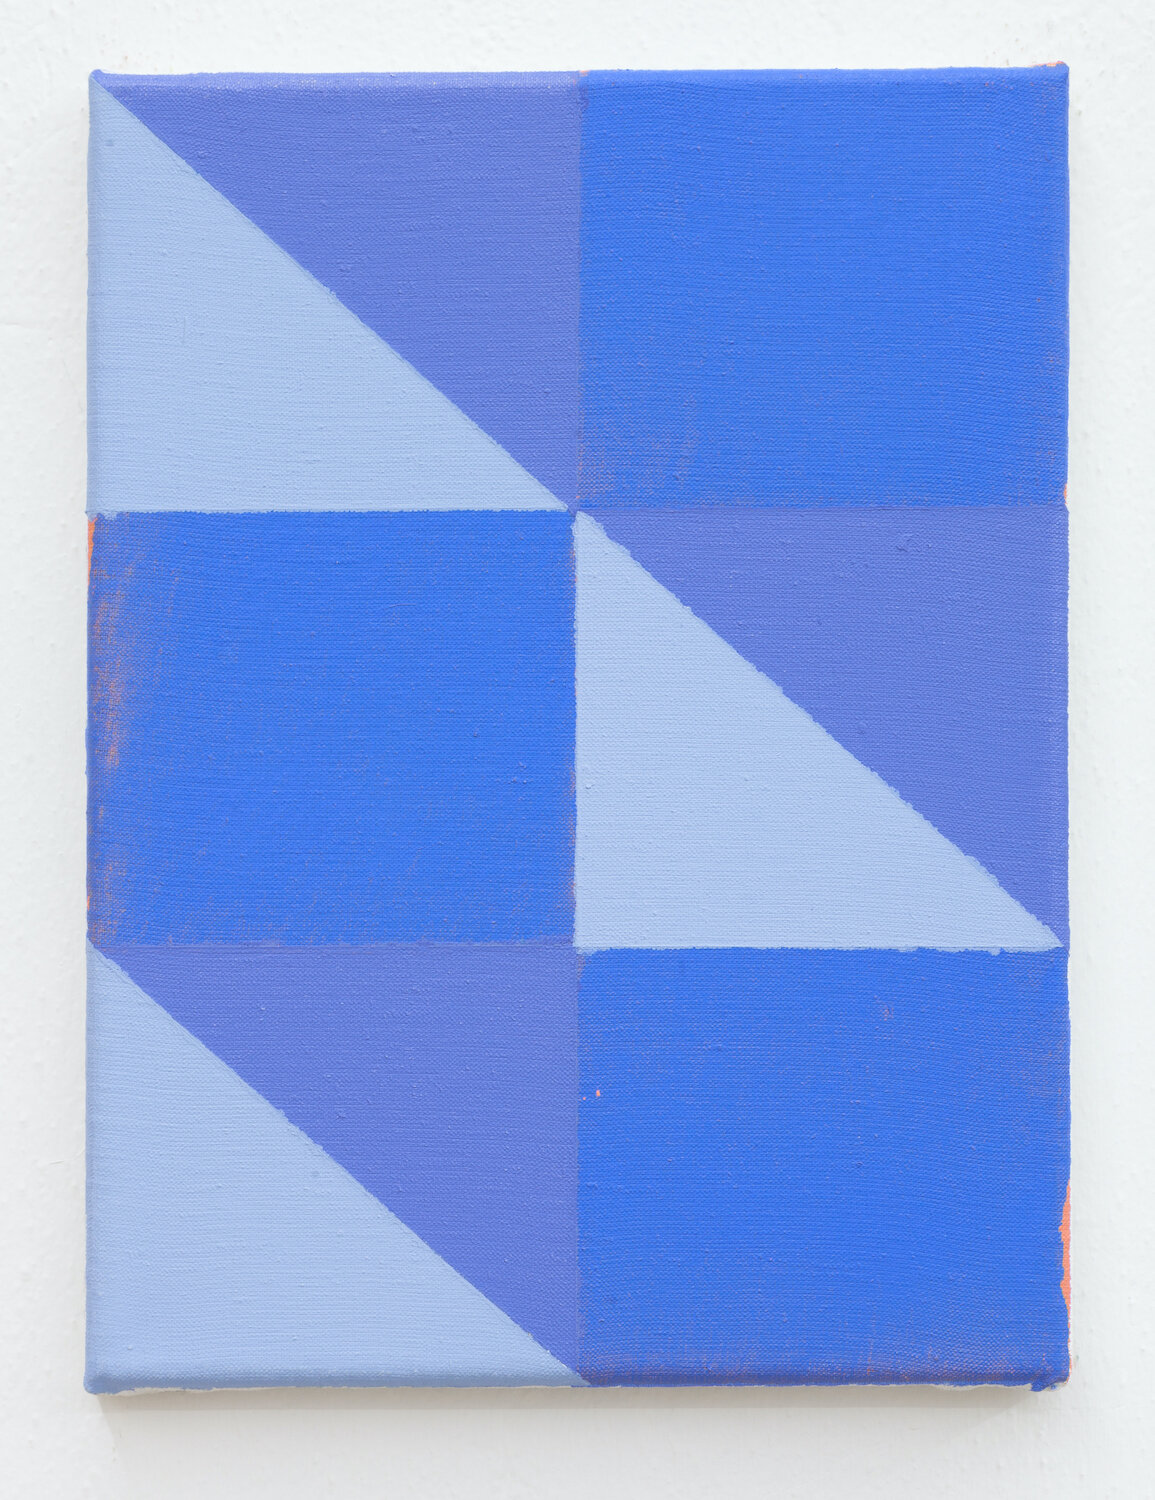  Joshua Abelow,  Untitled (Abstraction “HLL” ), 2019, Oil on linen, 12 x 9 inches 